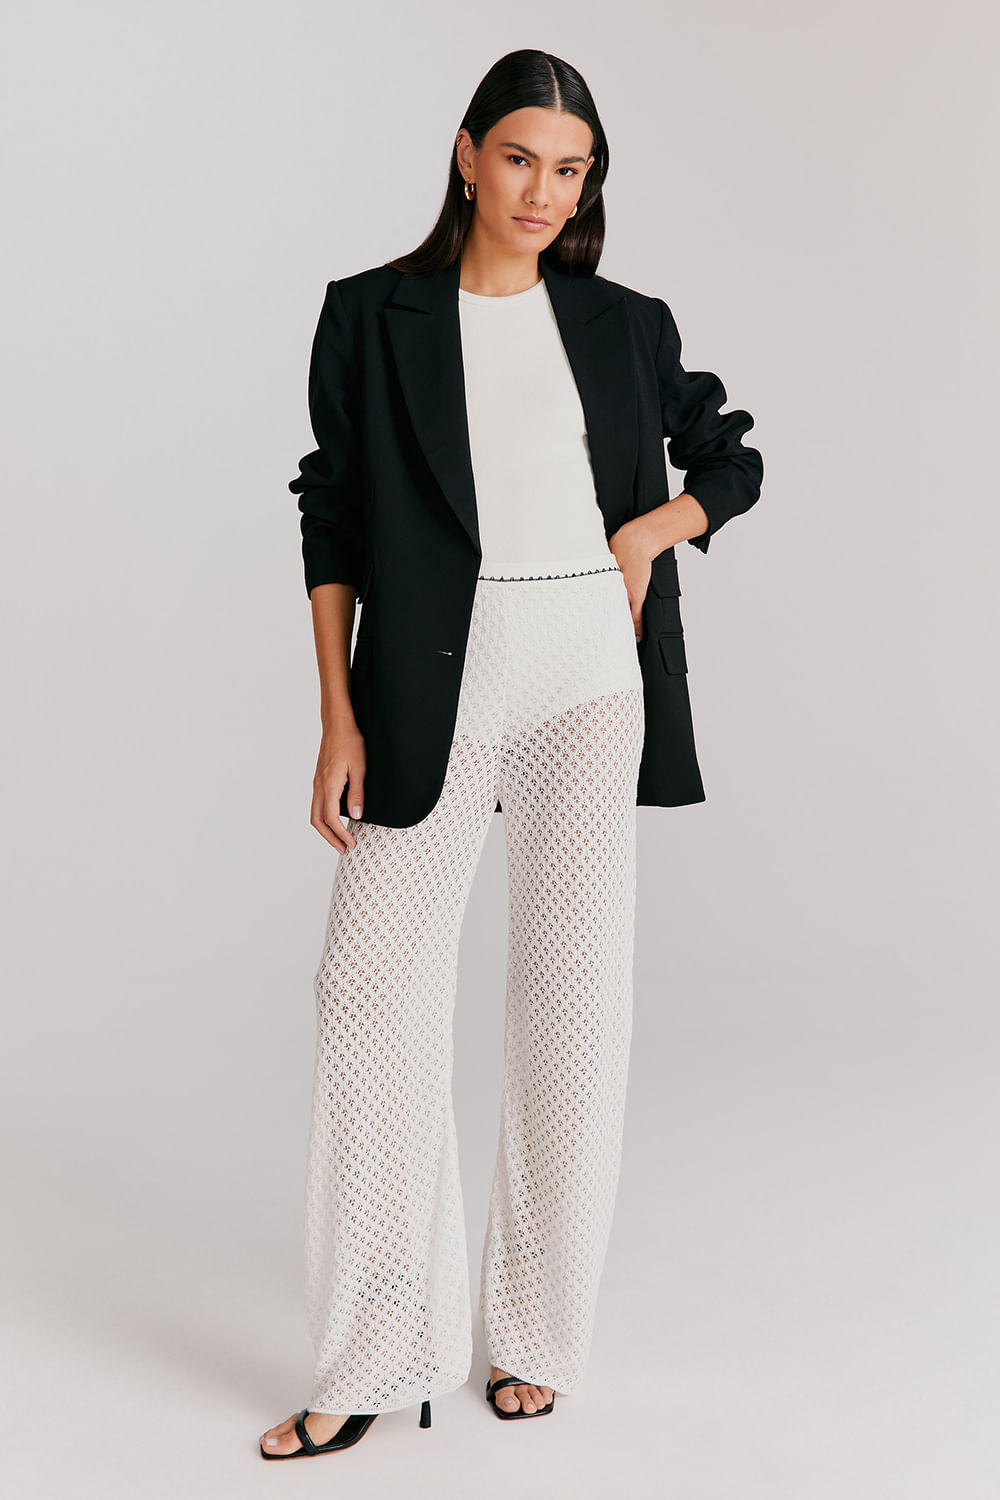 ASOS DESIGN straight leg track pant in tricot in black